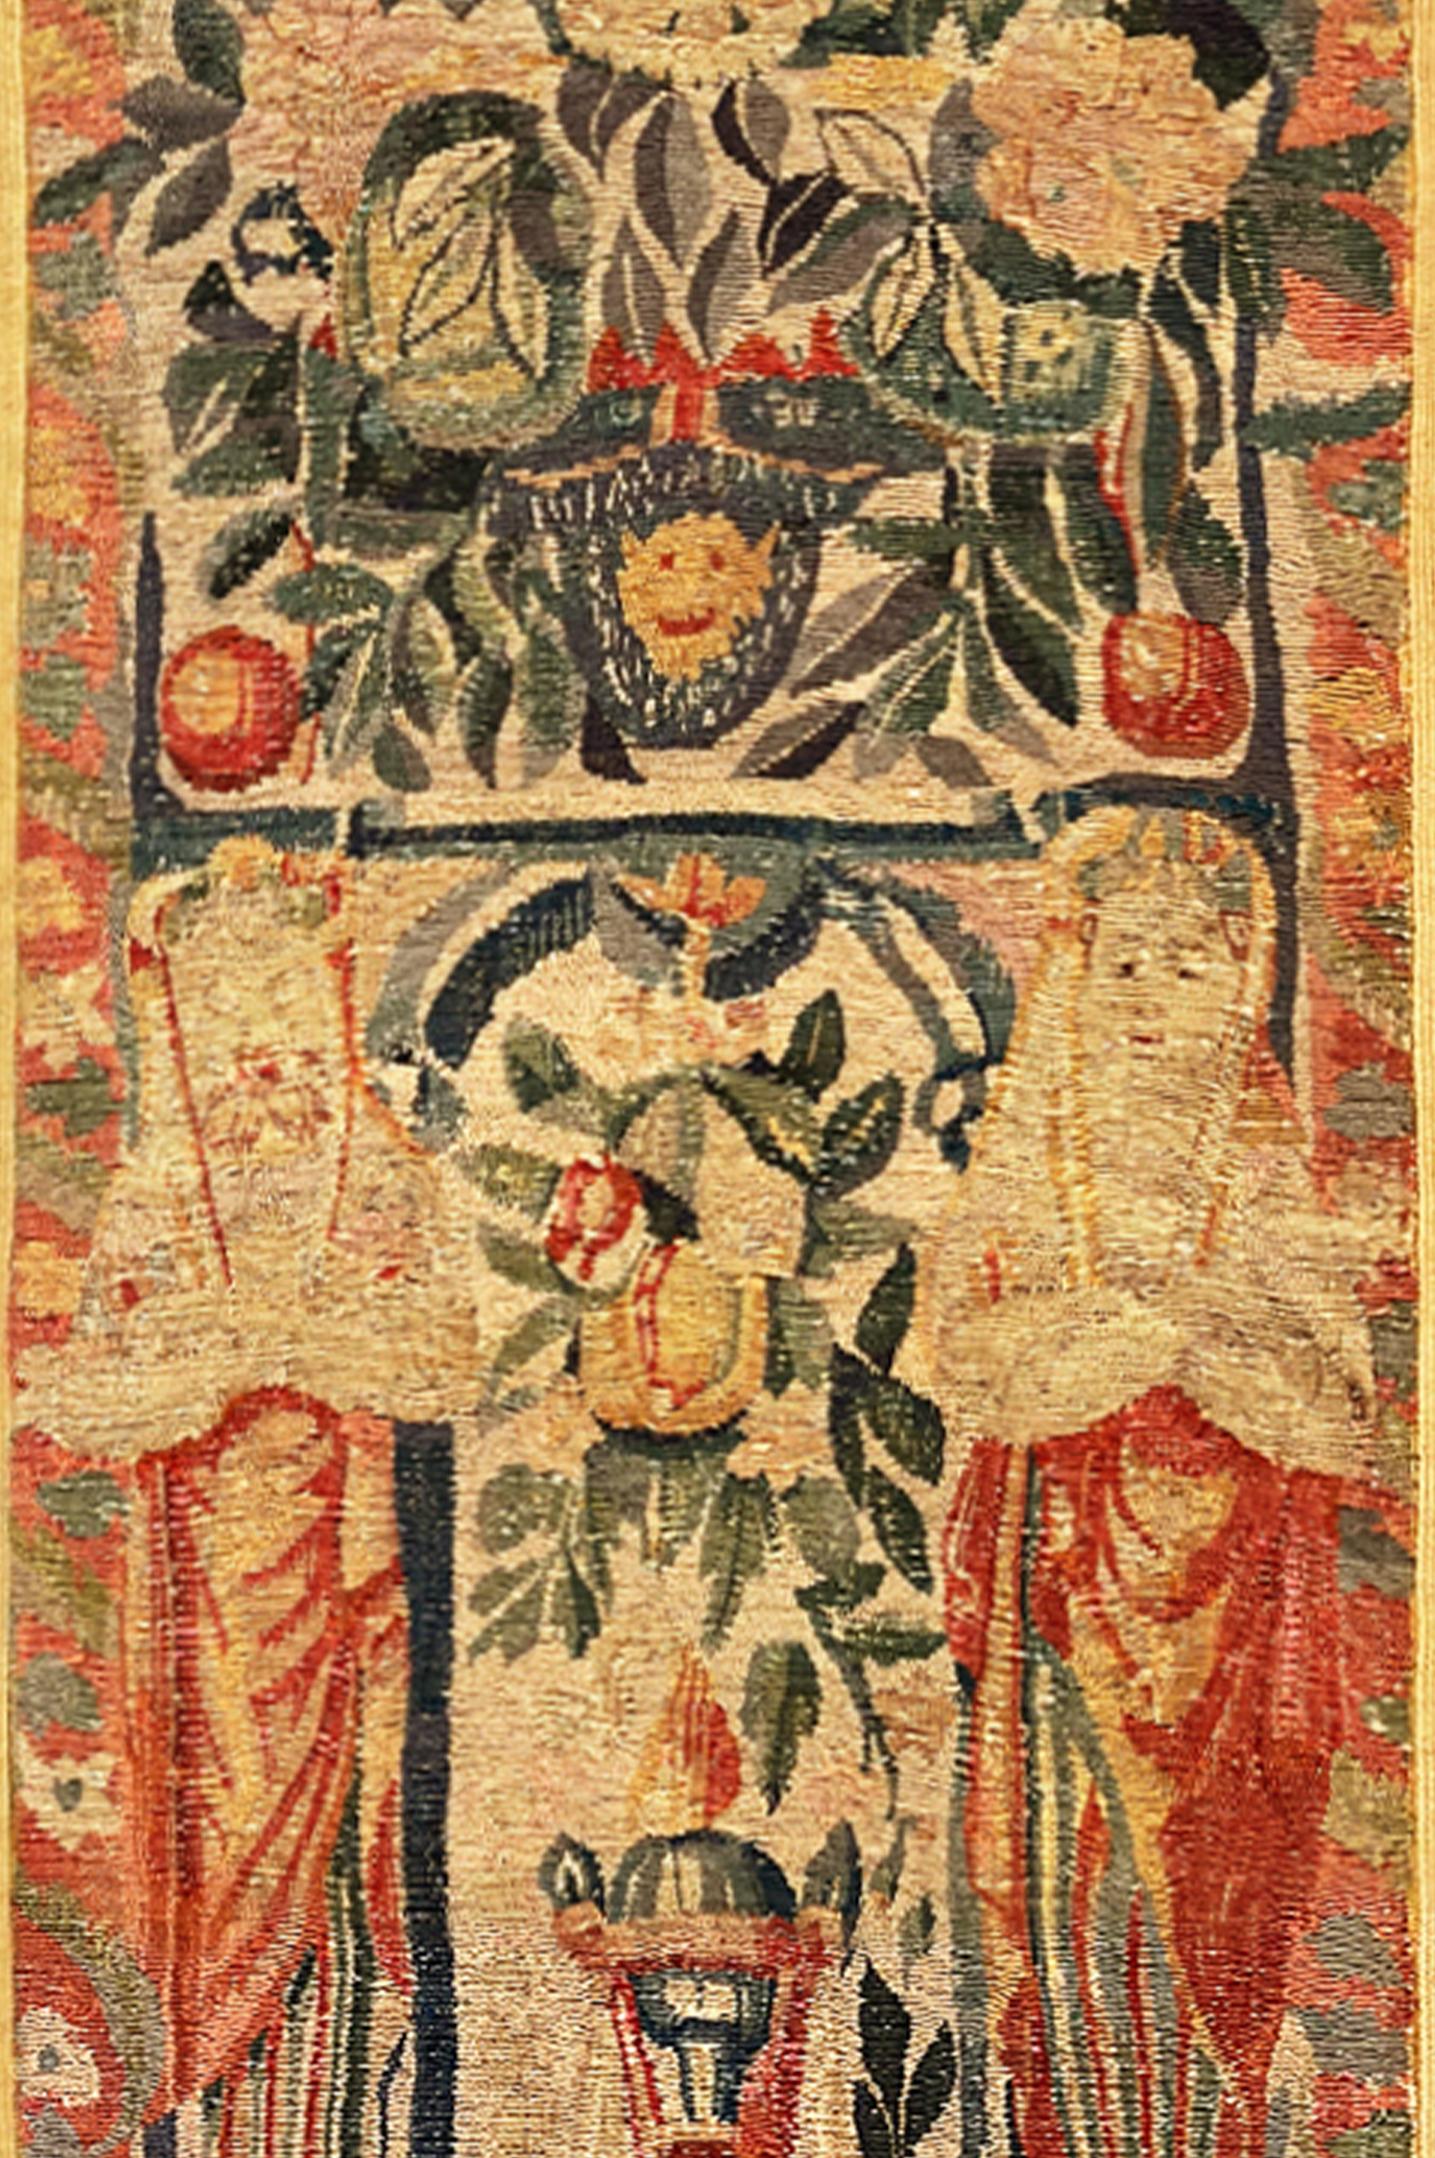 Pair of Late 16th Century Brussels Tapestry Panels, w/ Female Figures & Flowers For Sale 4